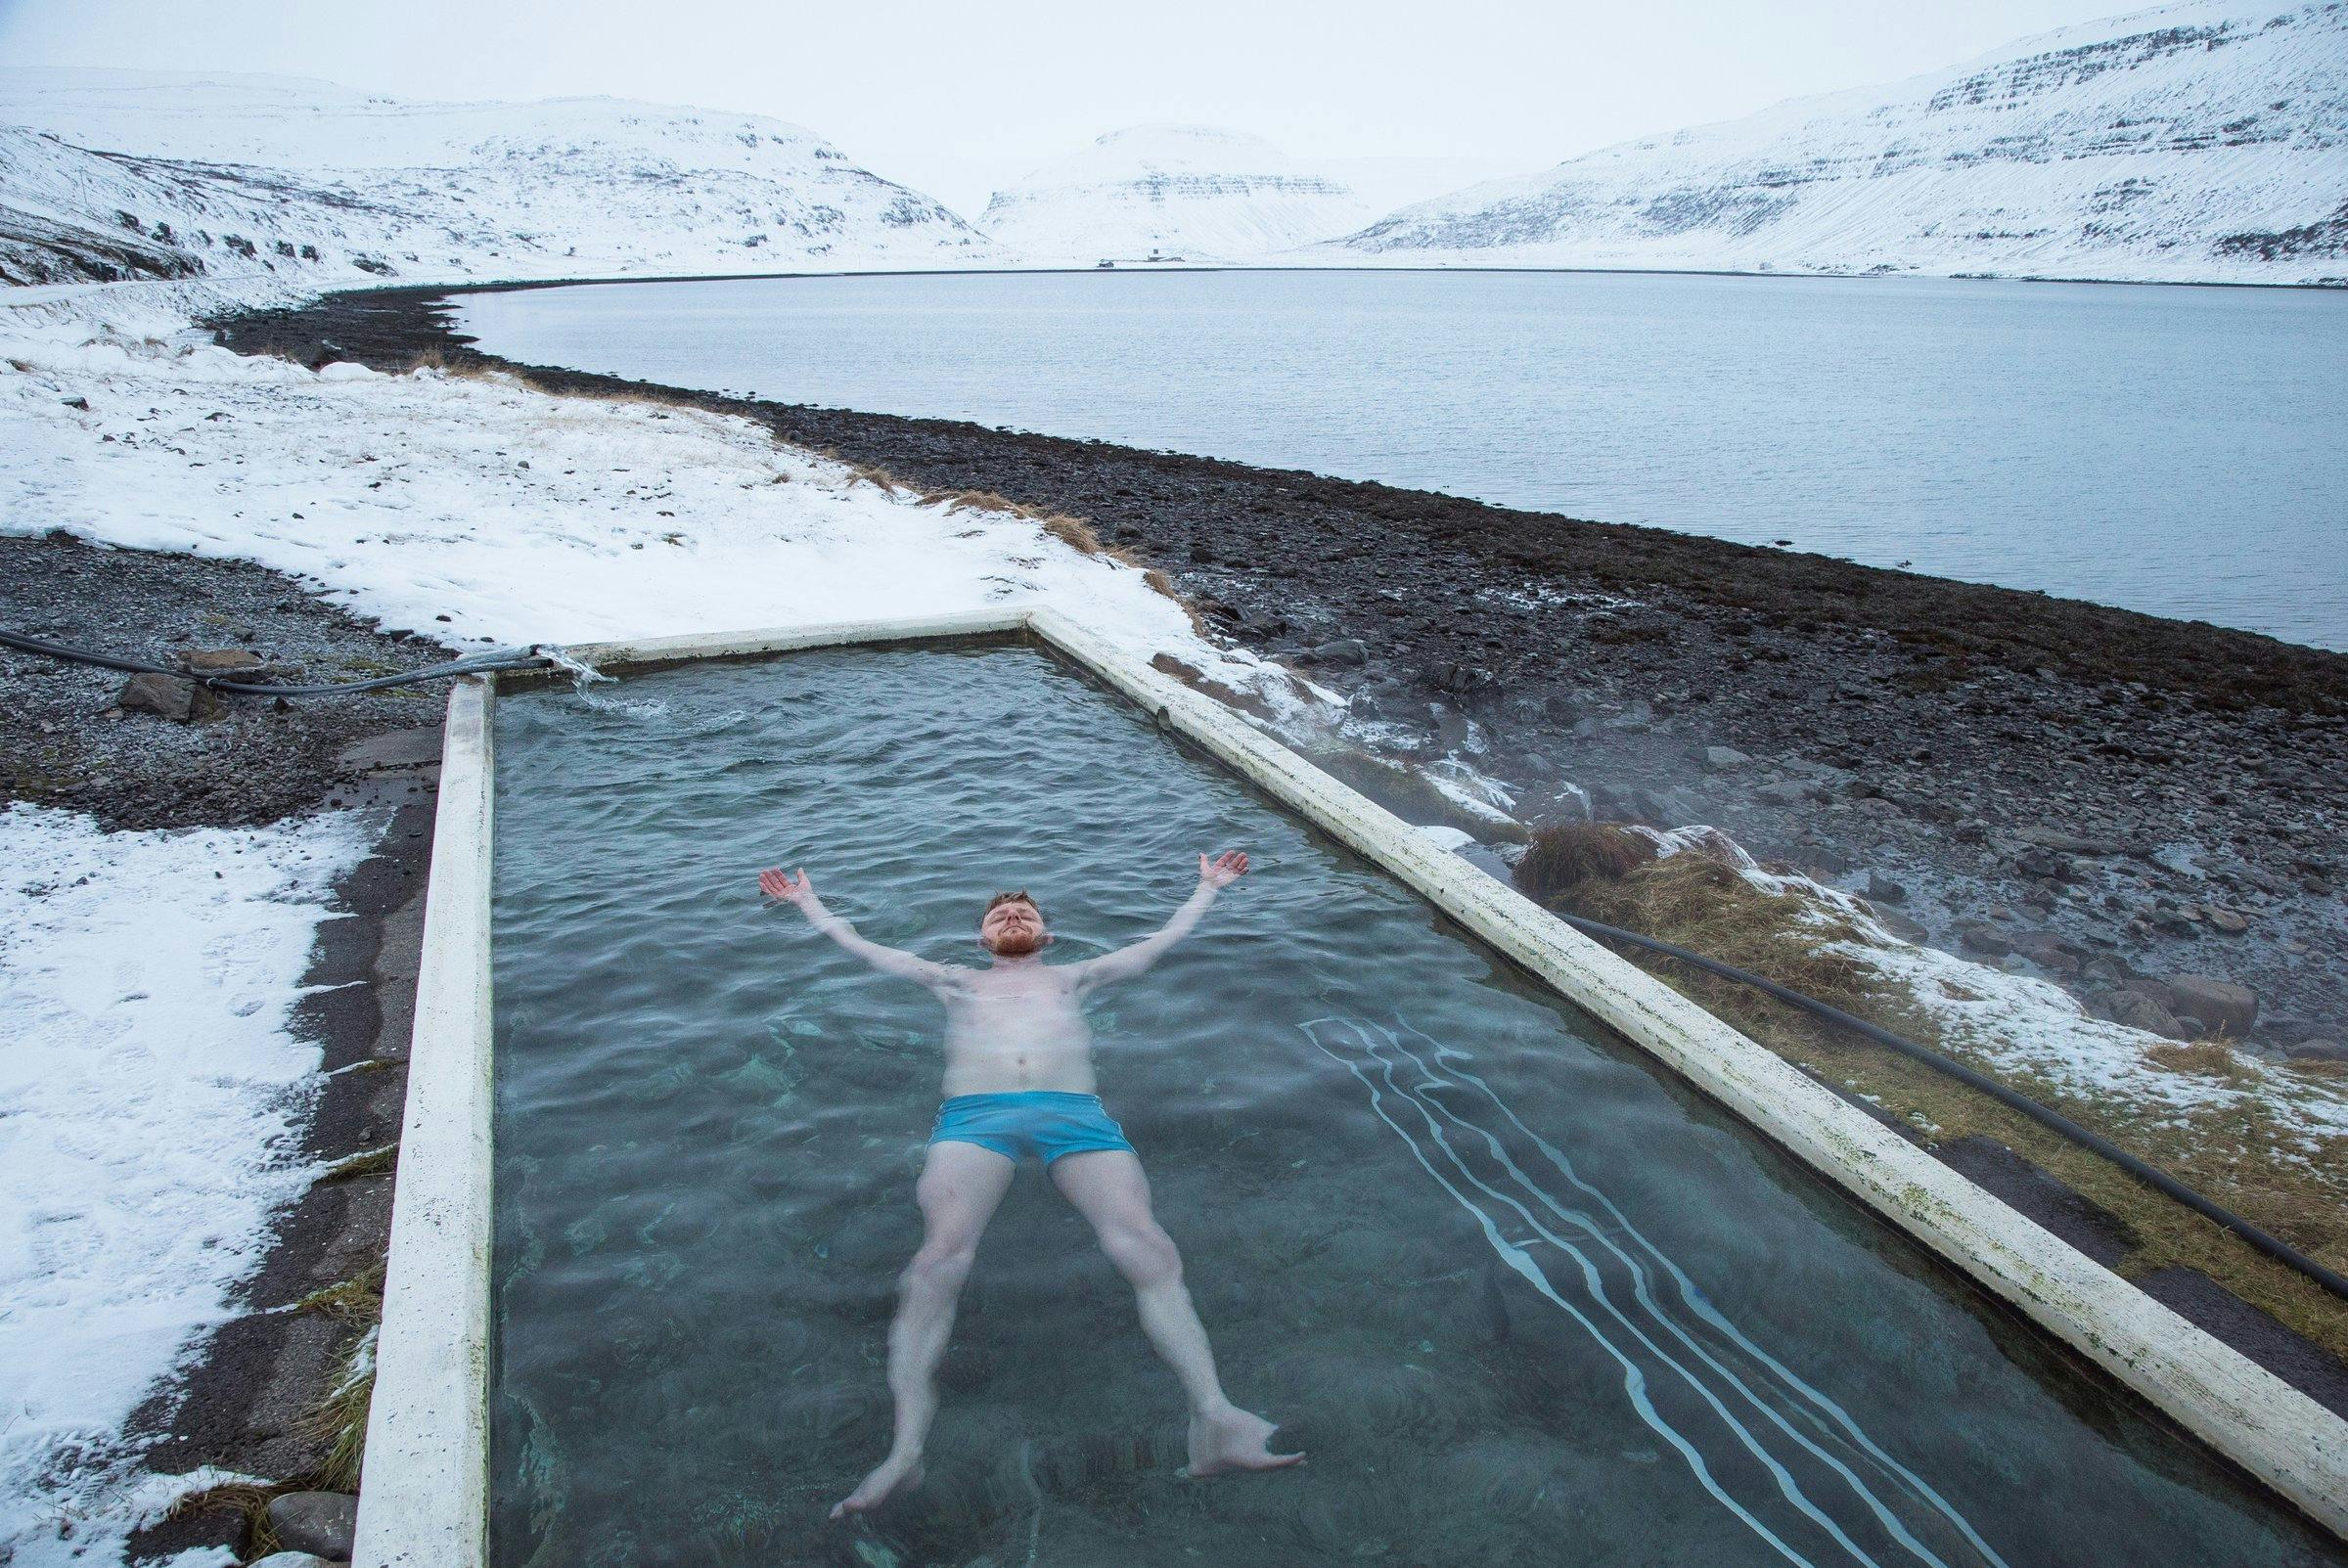 Man in blue bathing shorts lying in a hotwater pool surrounded only by snowy mountains